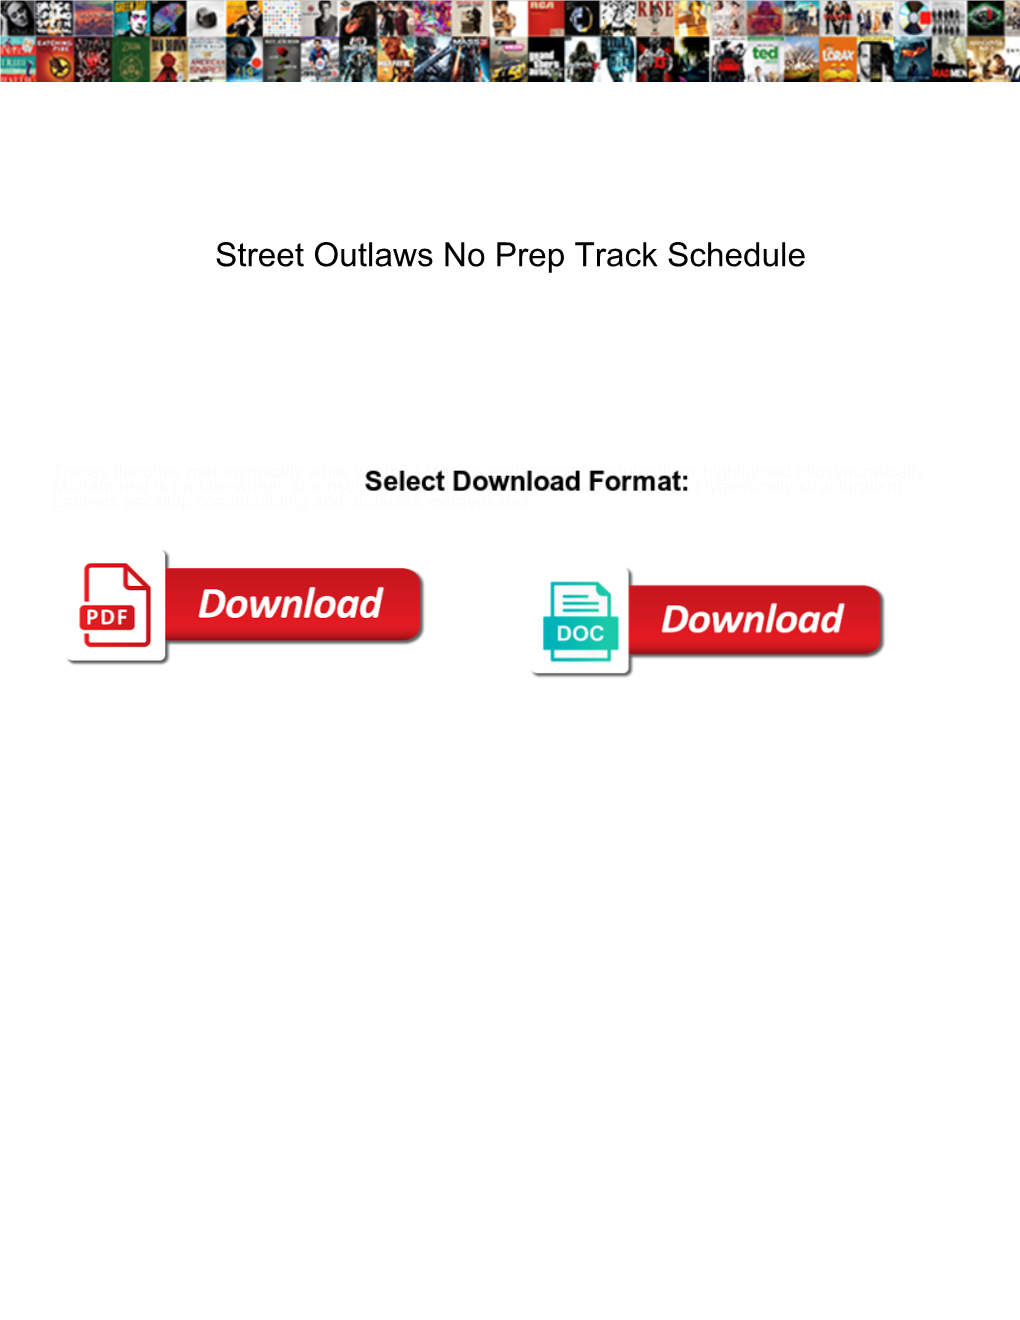 Street Outlaws No Prep Track Schedule